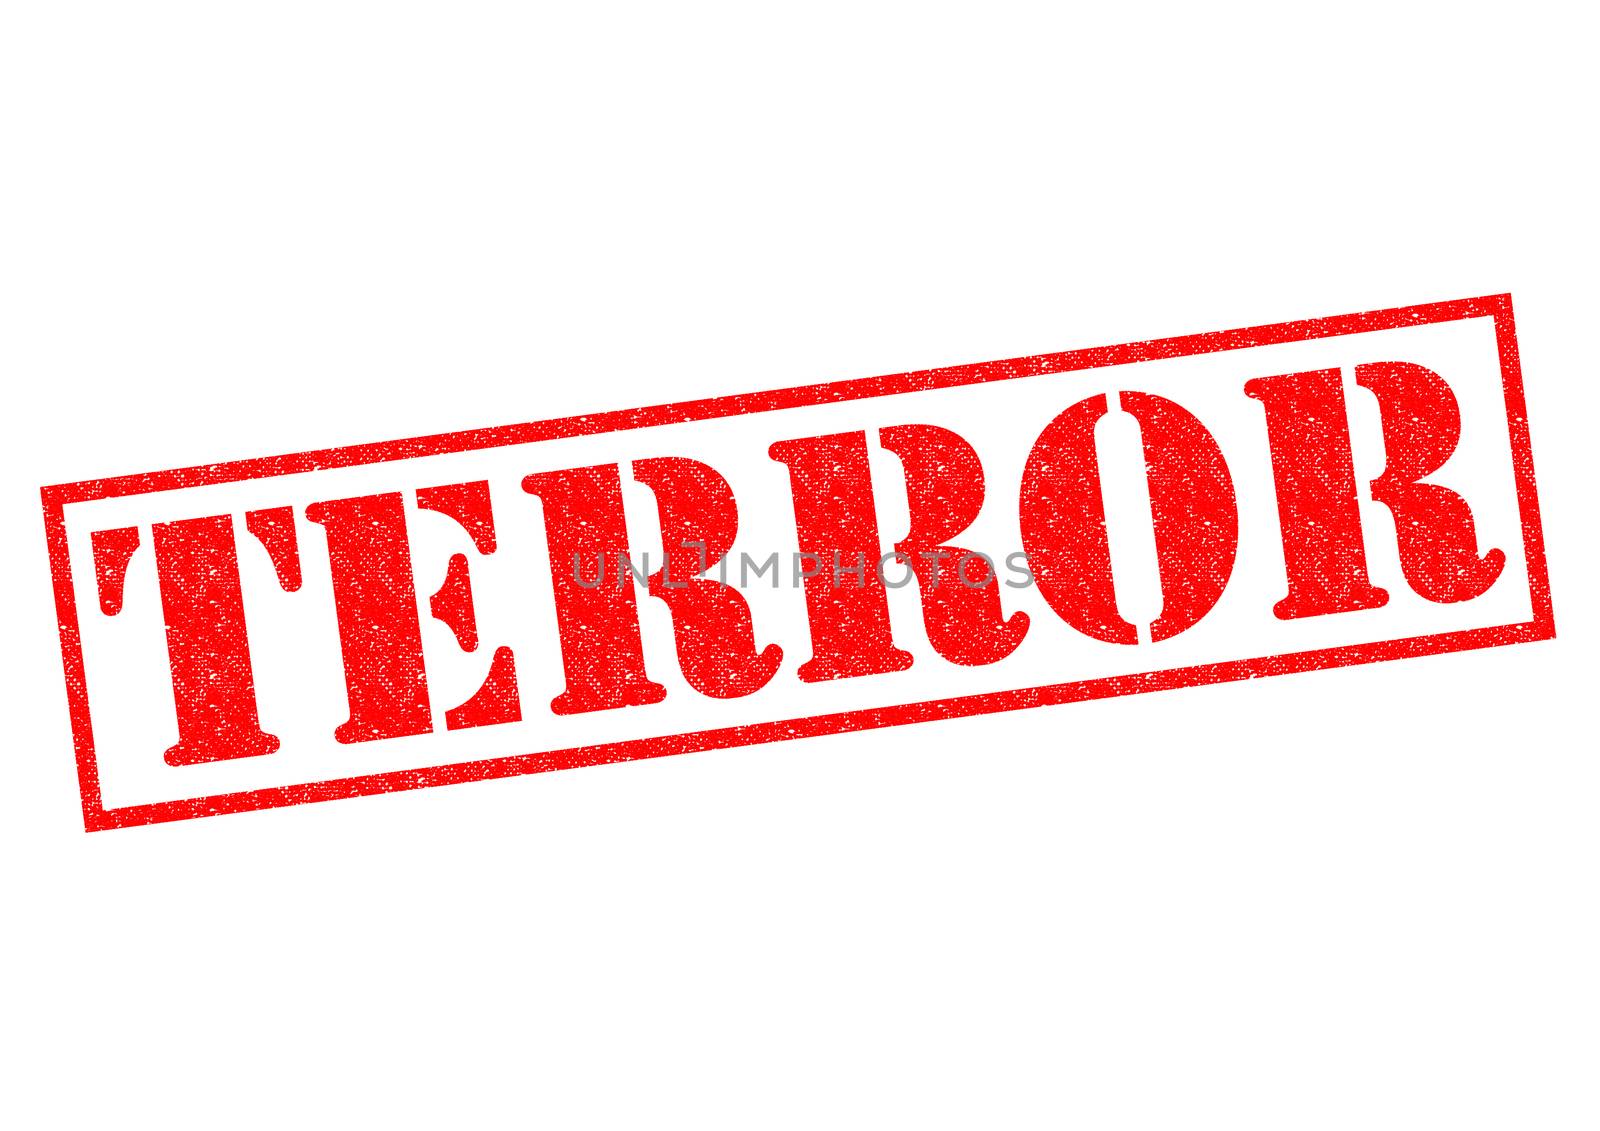 TERROR red Rubber Stamp over a white background.